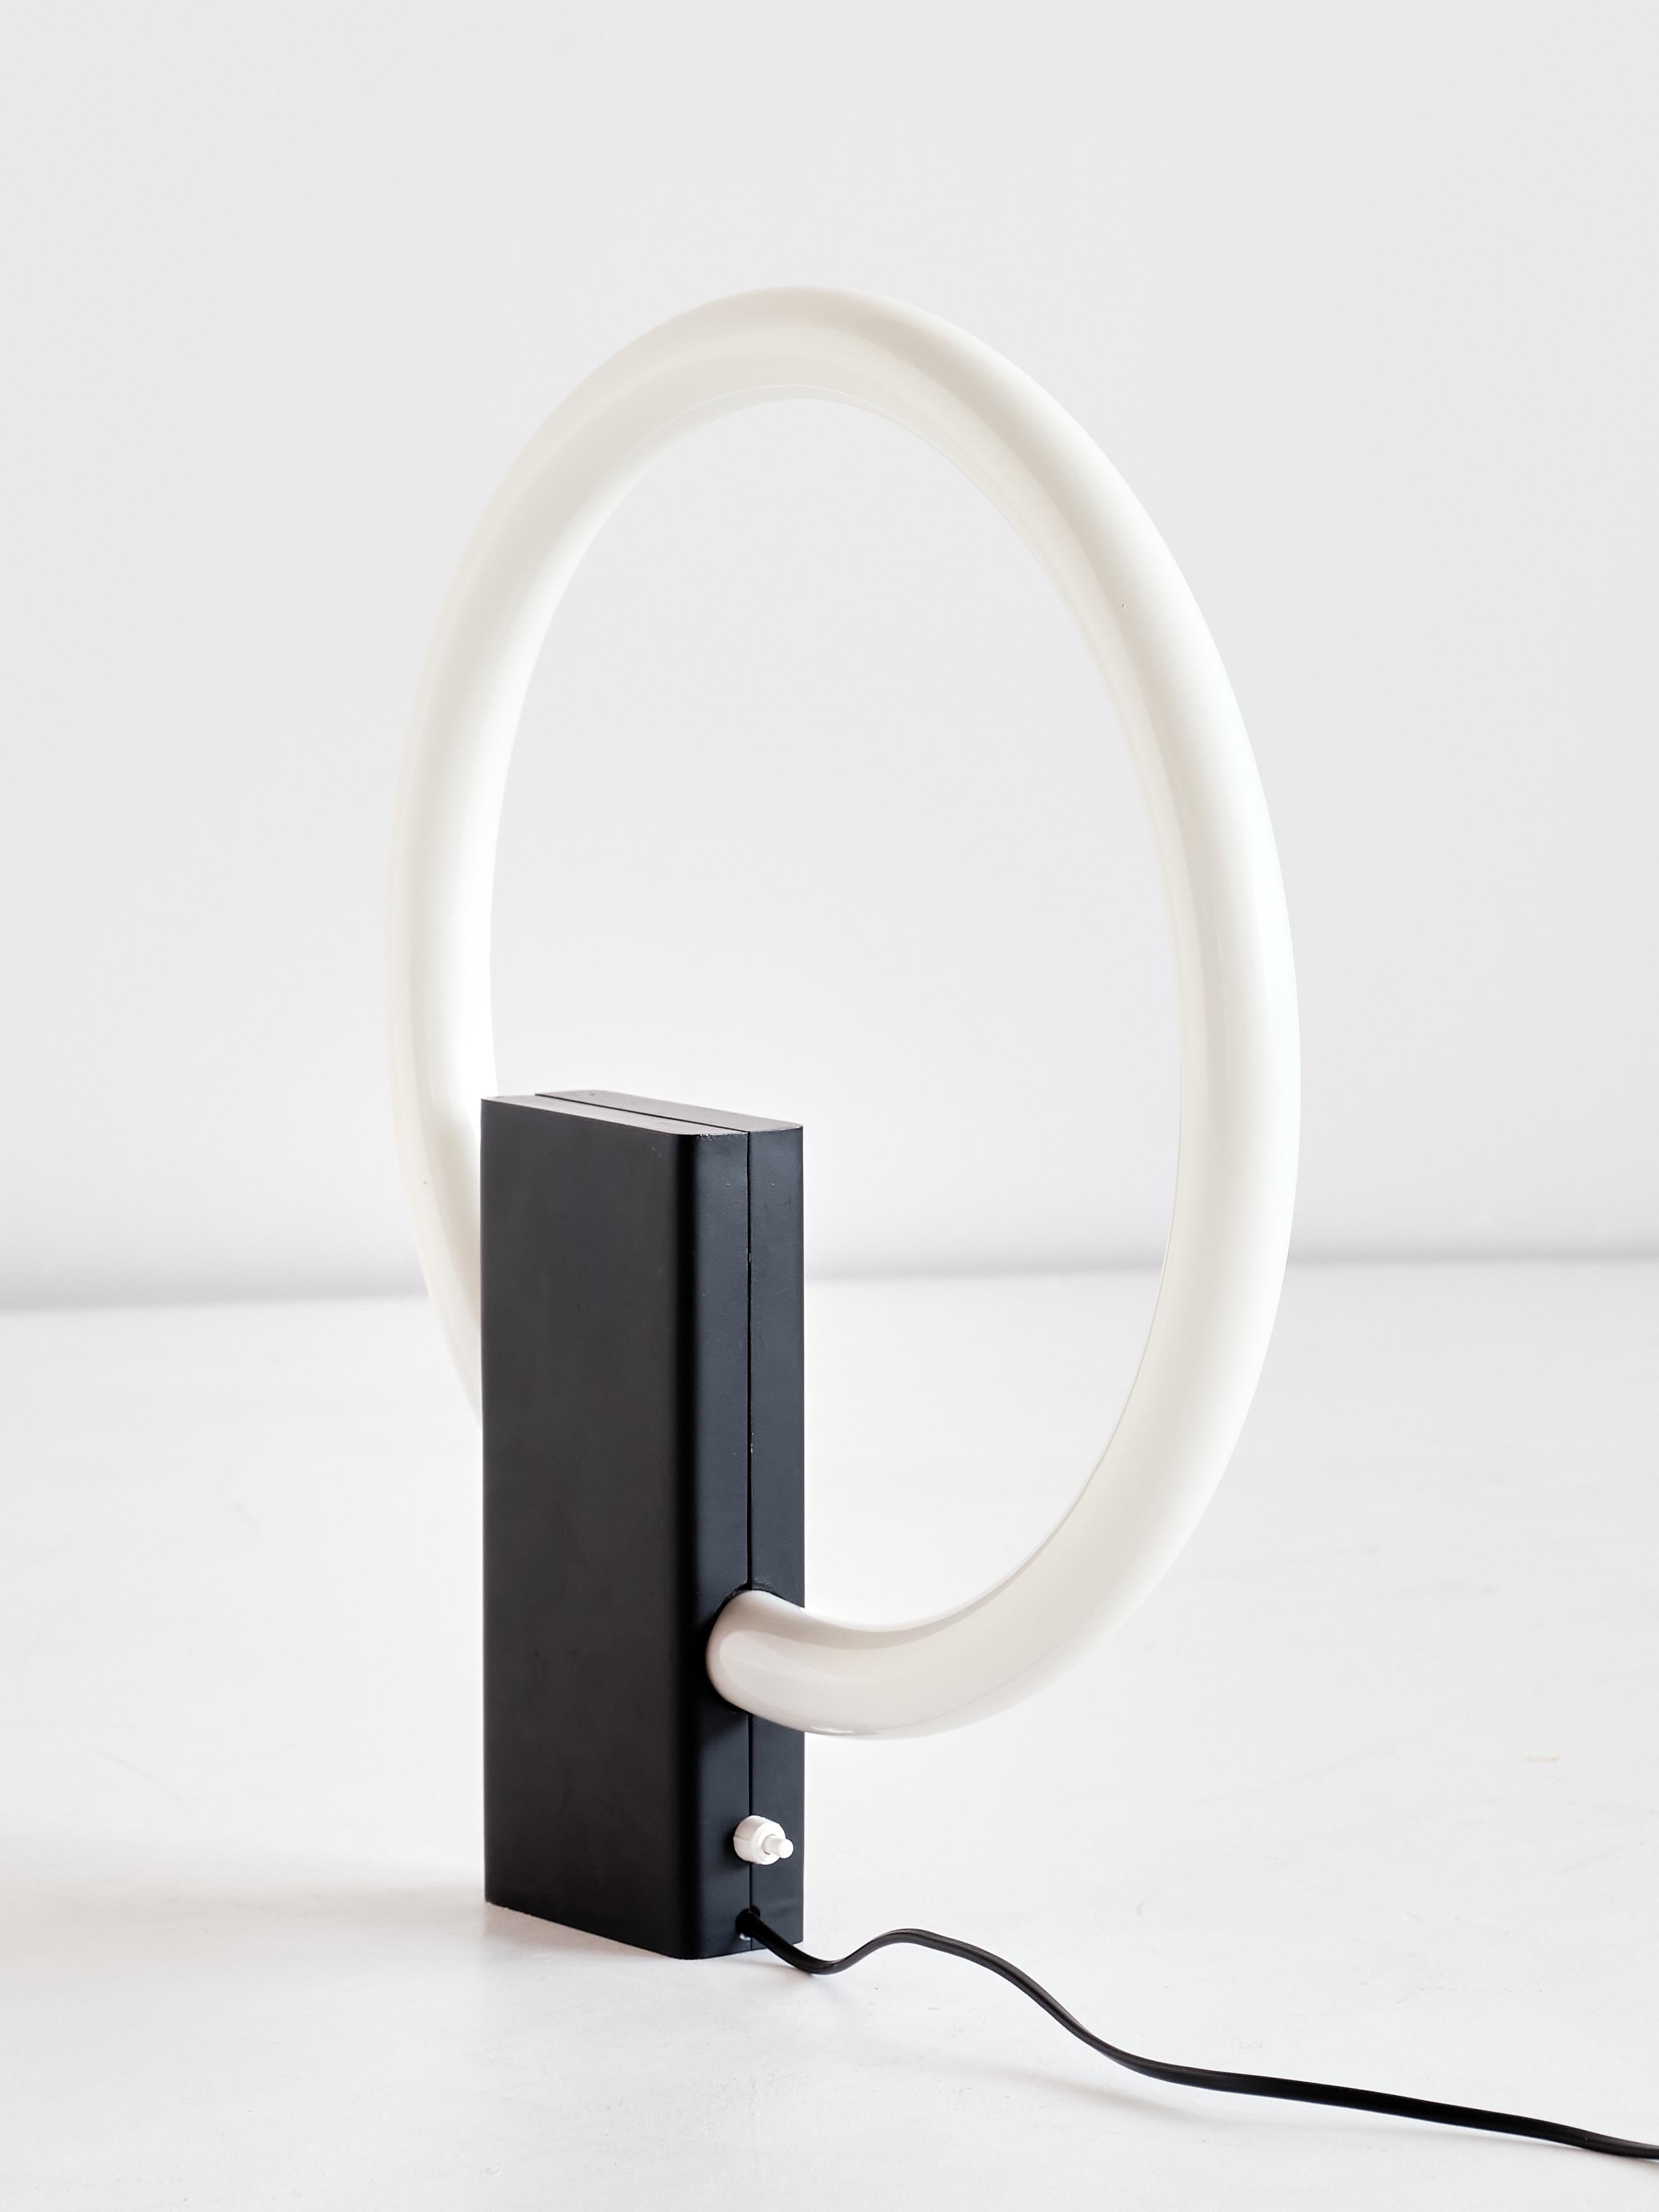 Dutch Minimalist Circular Tube Table Lamp with Black Steel Base, Netherlands, 1970s For Sale